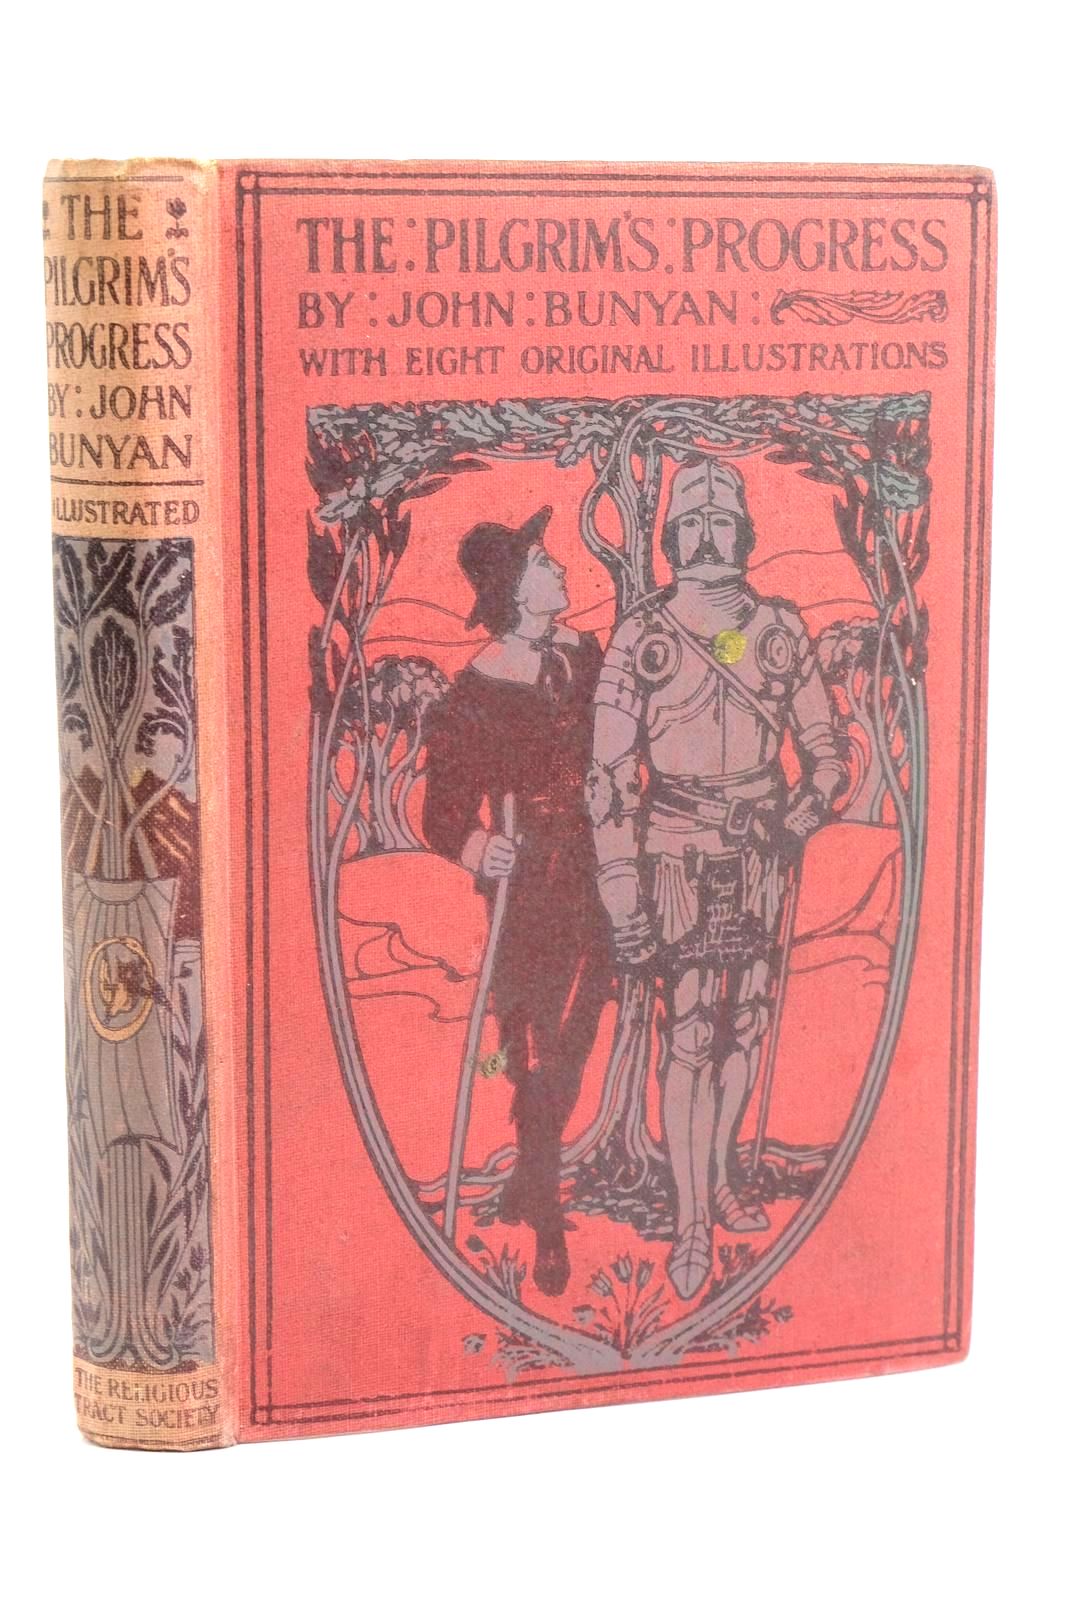 Photo of THE PILGRIM'S PROGRESS written by Bunyan, John illustrated by Copping, Harold published by The Religious Tract Society (STOCK CODE: 1319680)  for sale by Stella & Rose's Books